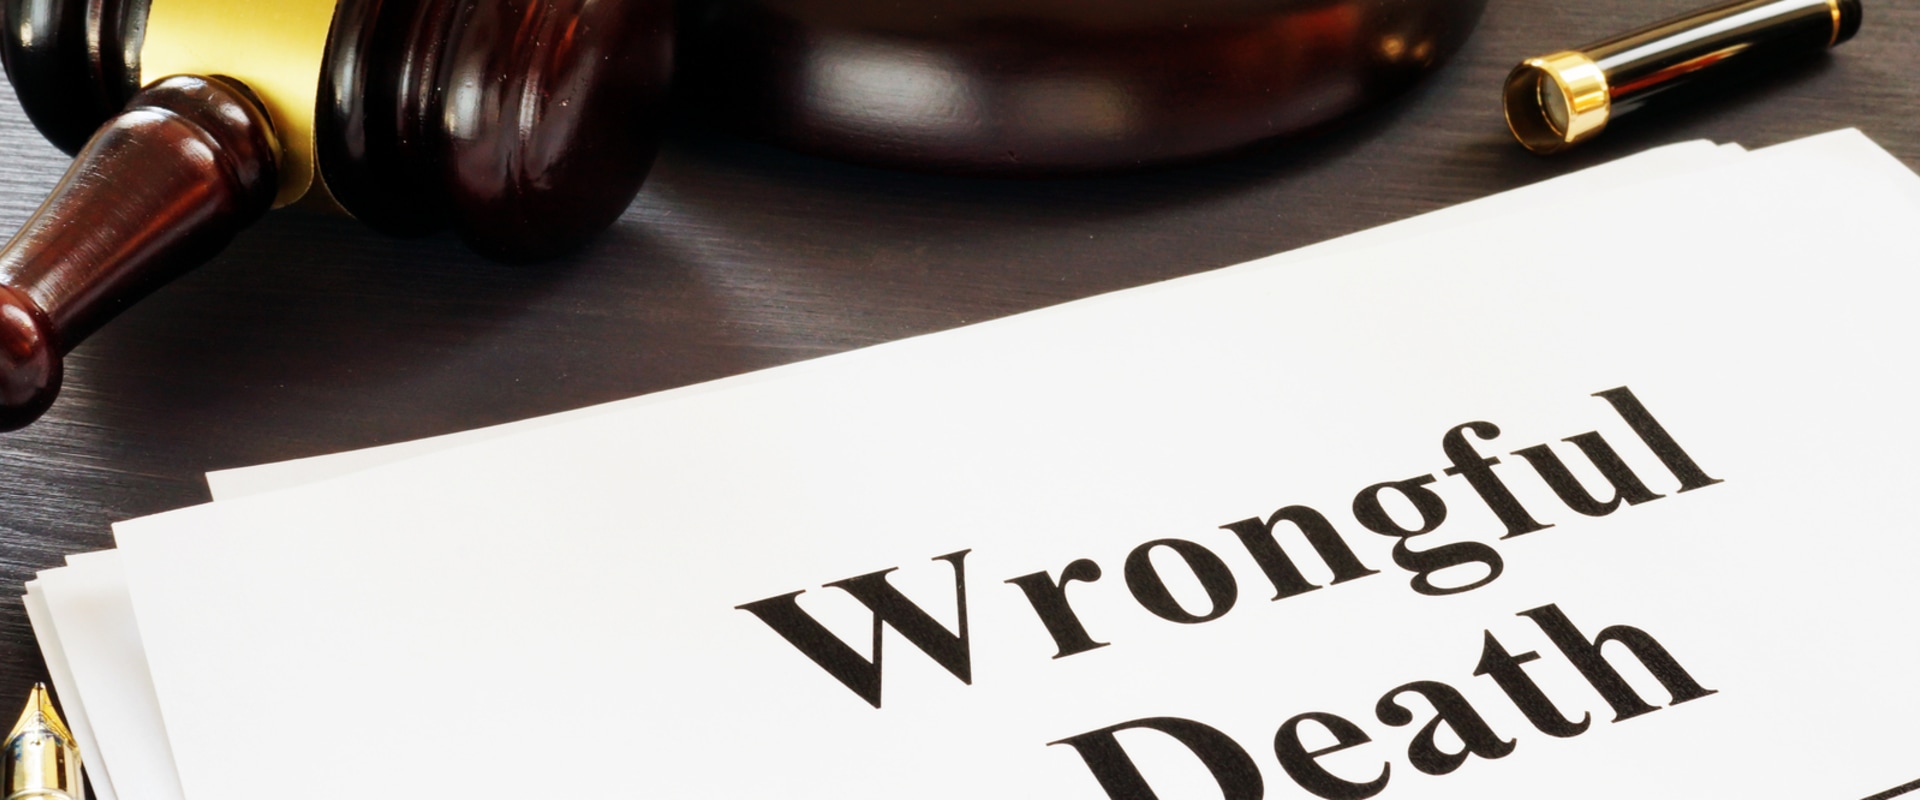 How A Personal Injury Lawyer Can Help With Wrongful Death Claims In Houston, TX